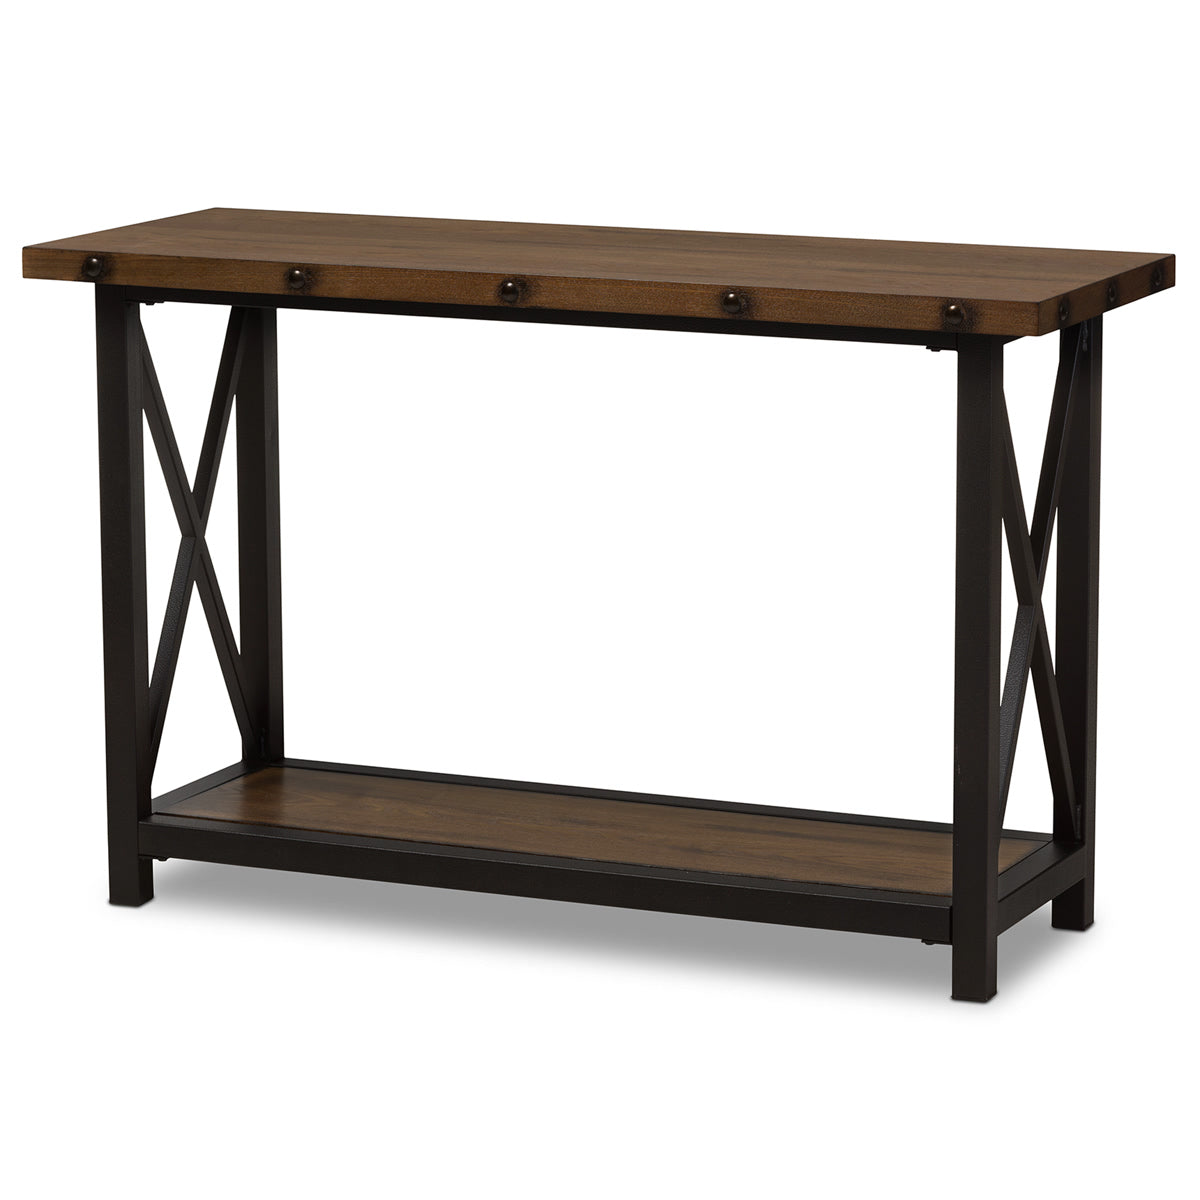 Baxton Studio Herzen Rustic Industrial Style Antique Black Textured Finished Metal Distressed Wood Occasional Console Table Baxton Studio-side tables-Minimal And Modern - 2